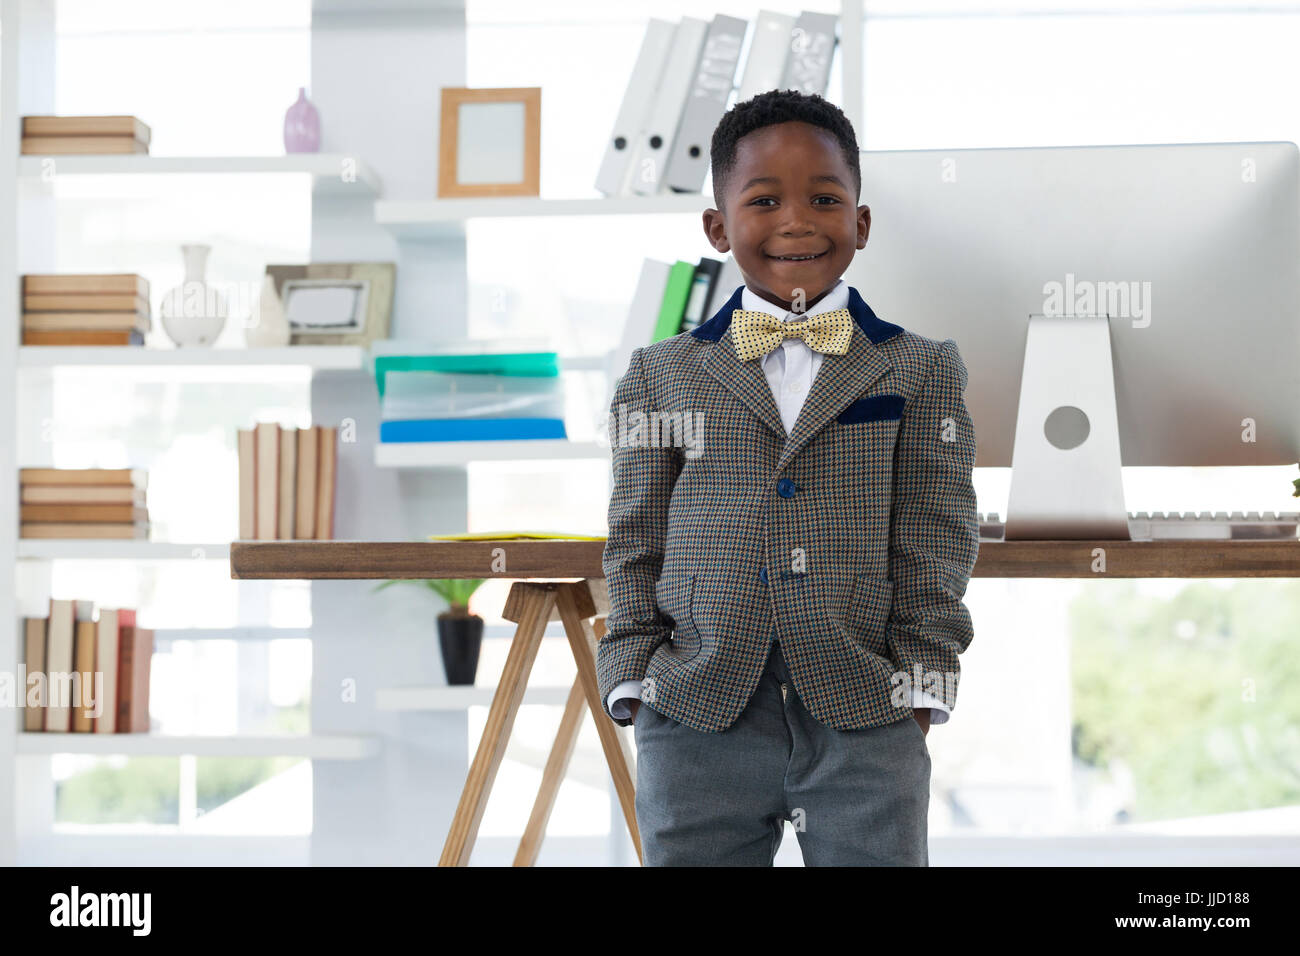 Portrait of boy imitating at businessman standing in office Stock Photo